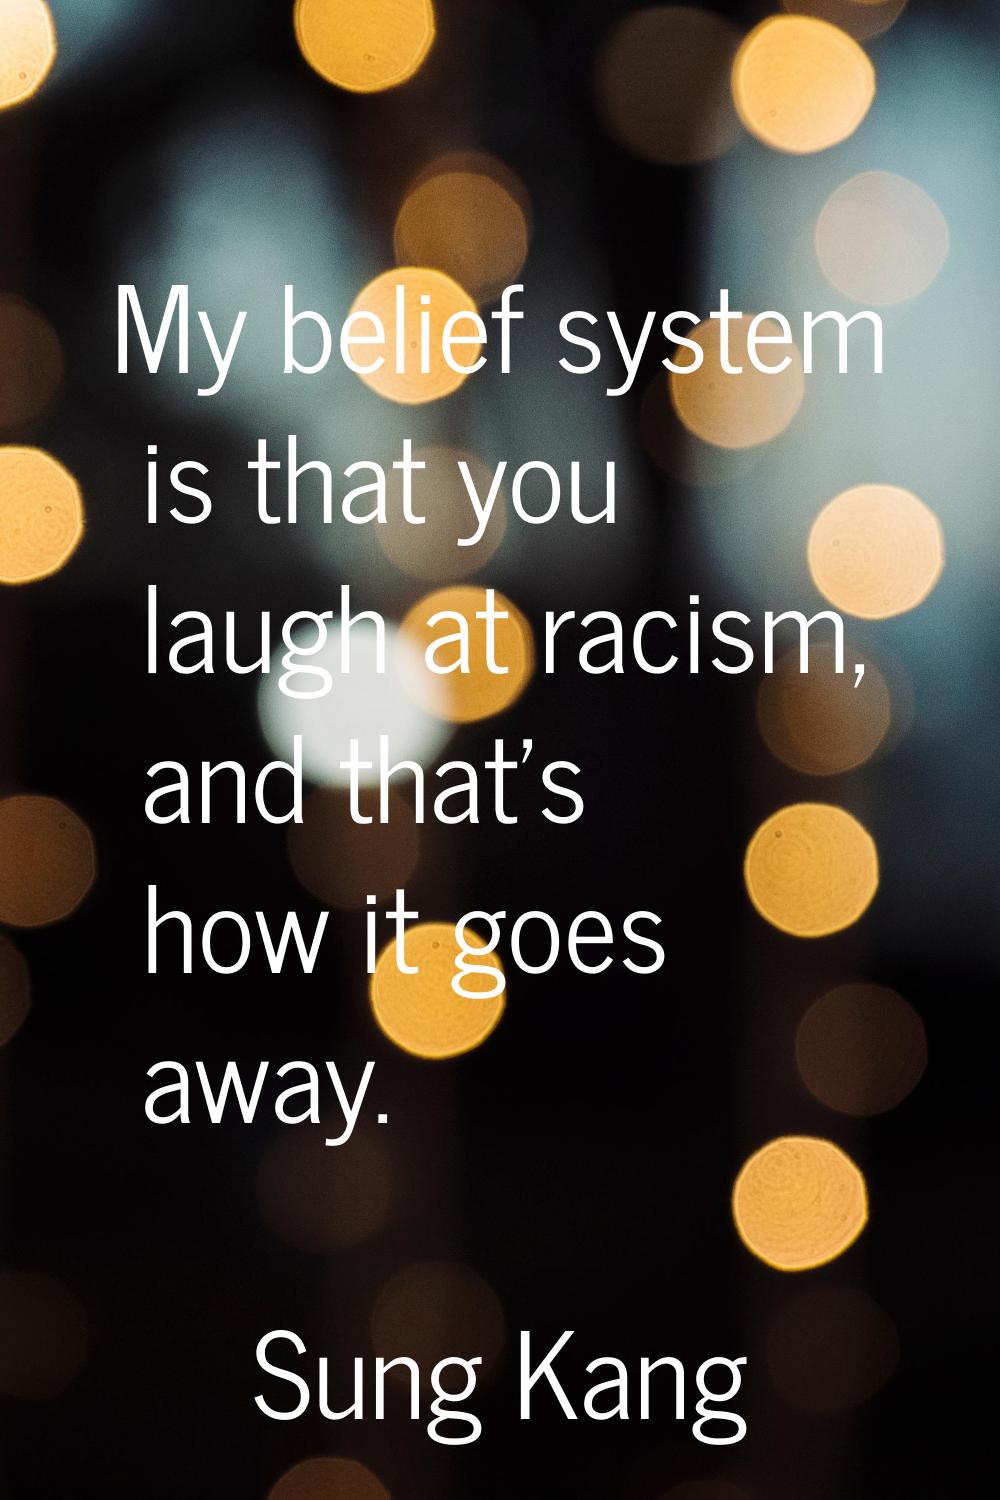 My belief system is that you laugh at racism, and that's how it goes away.